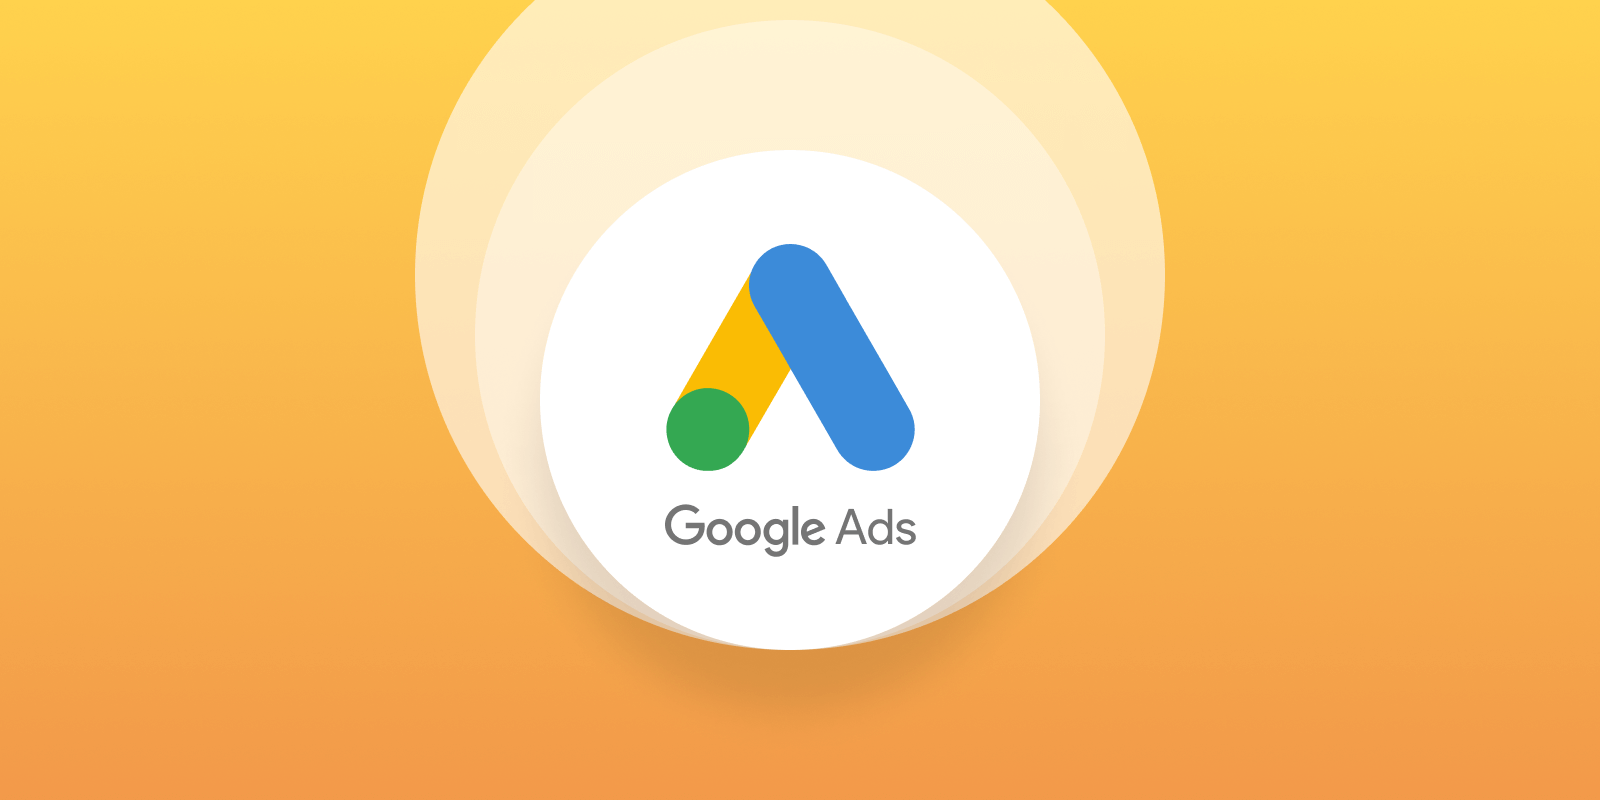 Supercharge your online visibility with our Google Ads services.